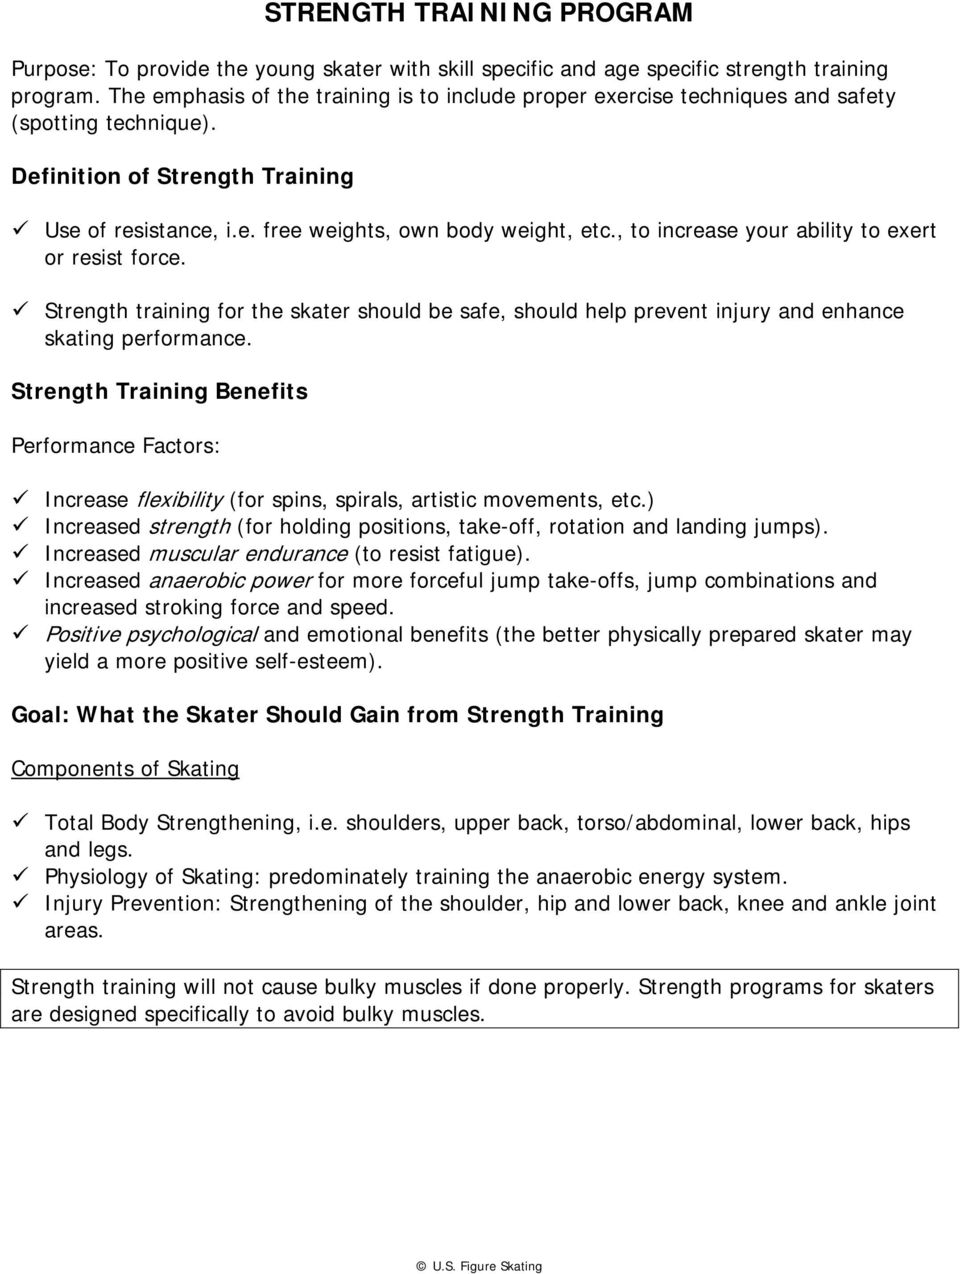 , to increase your ability to exert or resist force. Strength training for the skater should be safe, should help prevent injury and enhance skating performance.